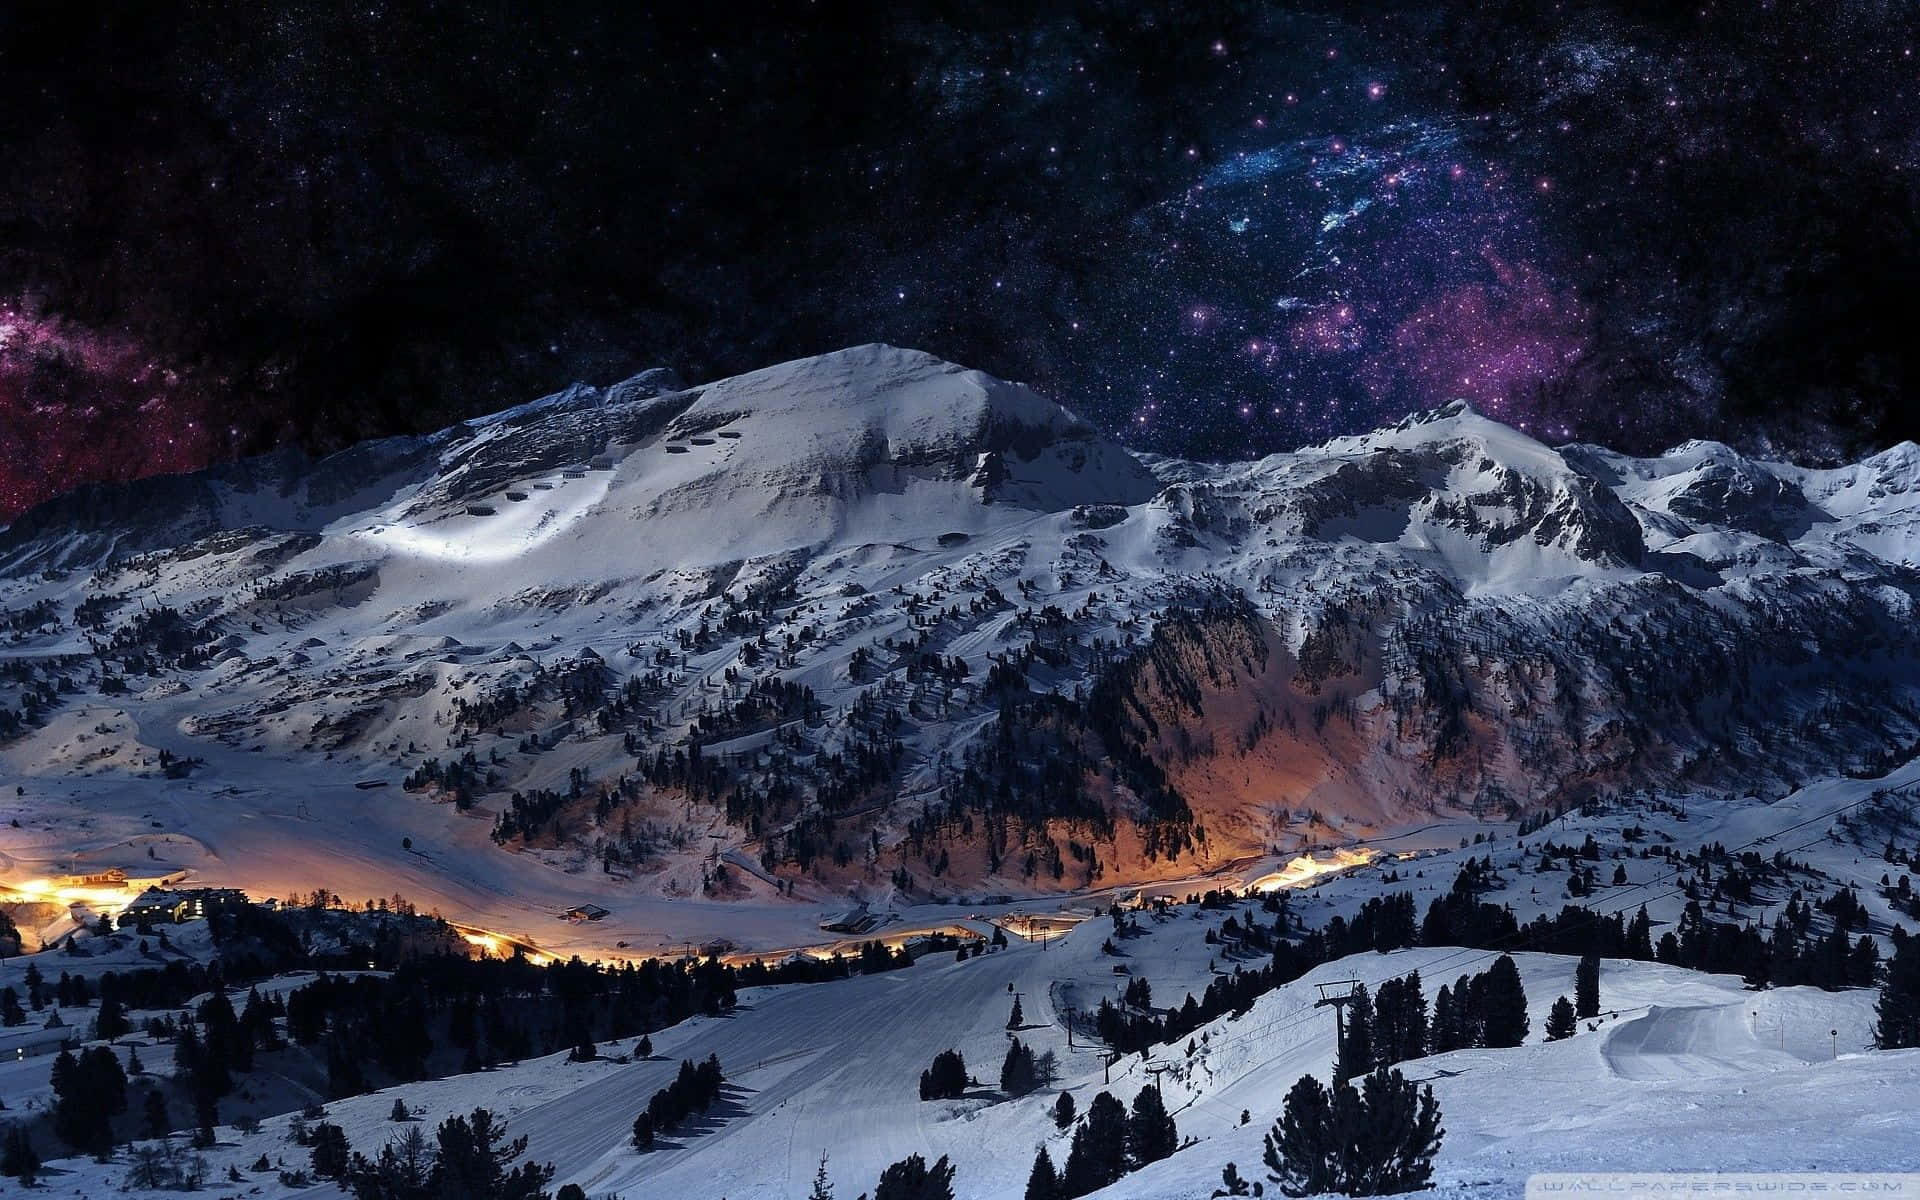 A Mountain With Snow And Stars In The Sky